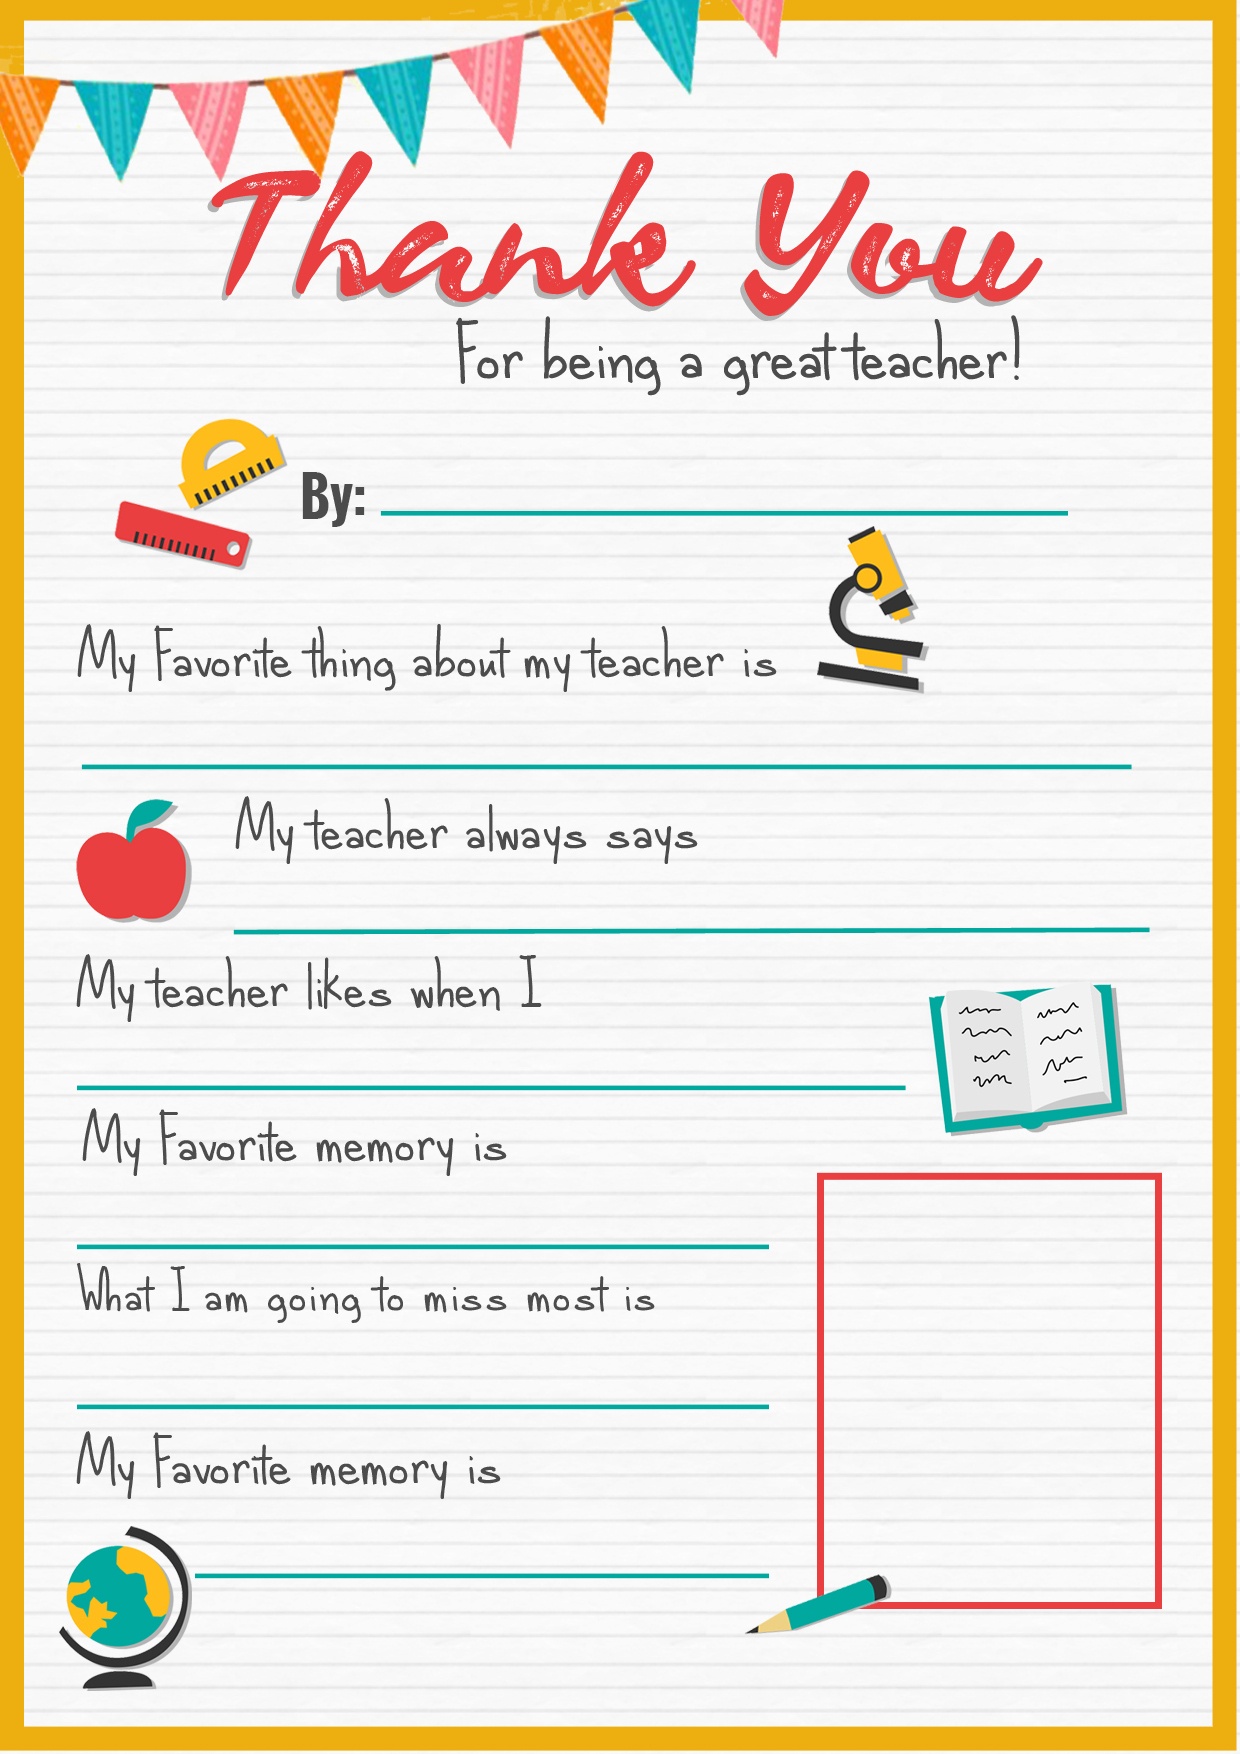 Thank You Teacher - A Free Printable | Stay At Home Mum - All About My Teacher Free Printable